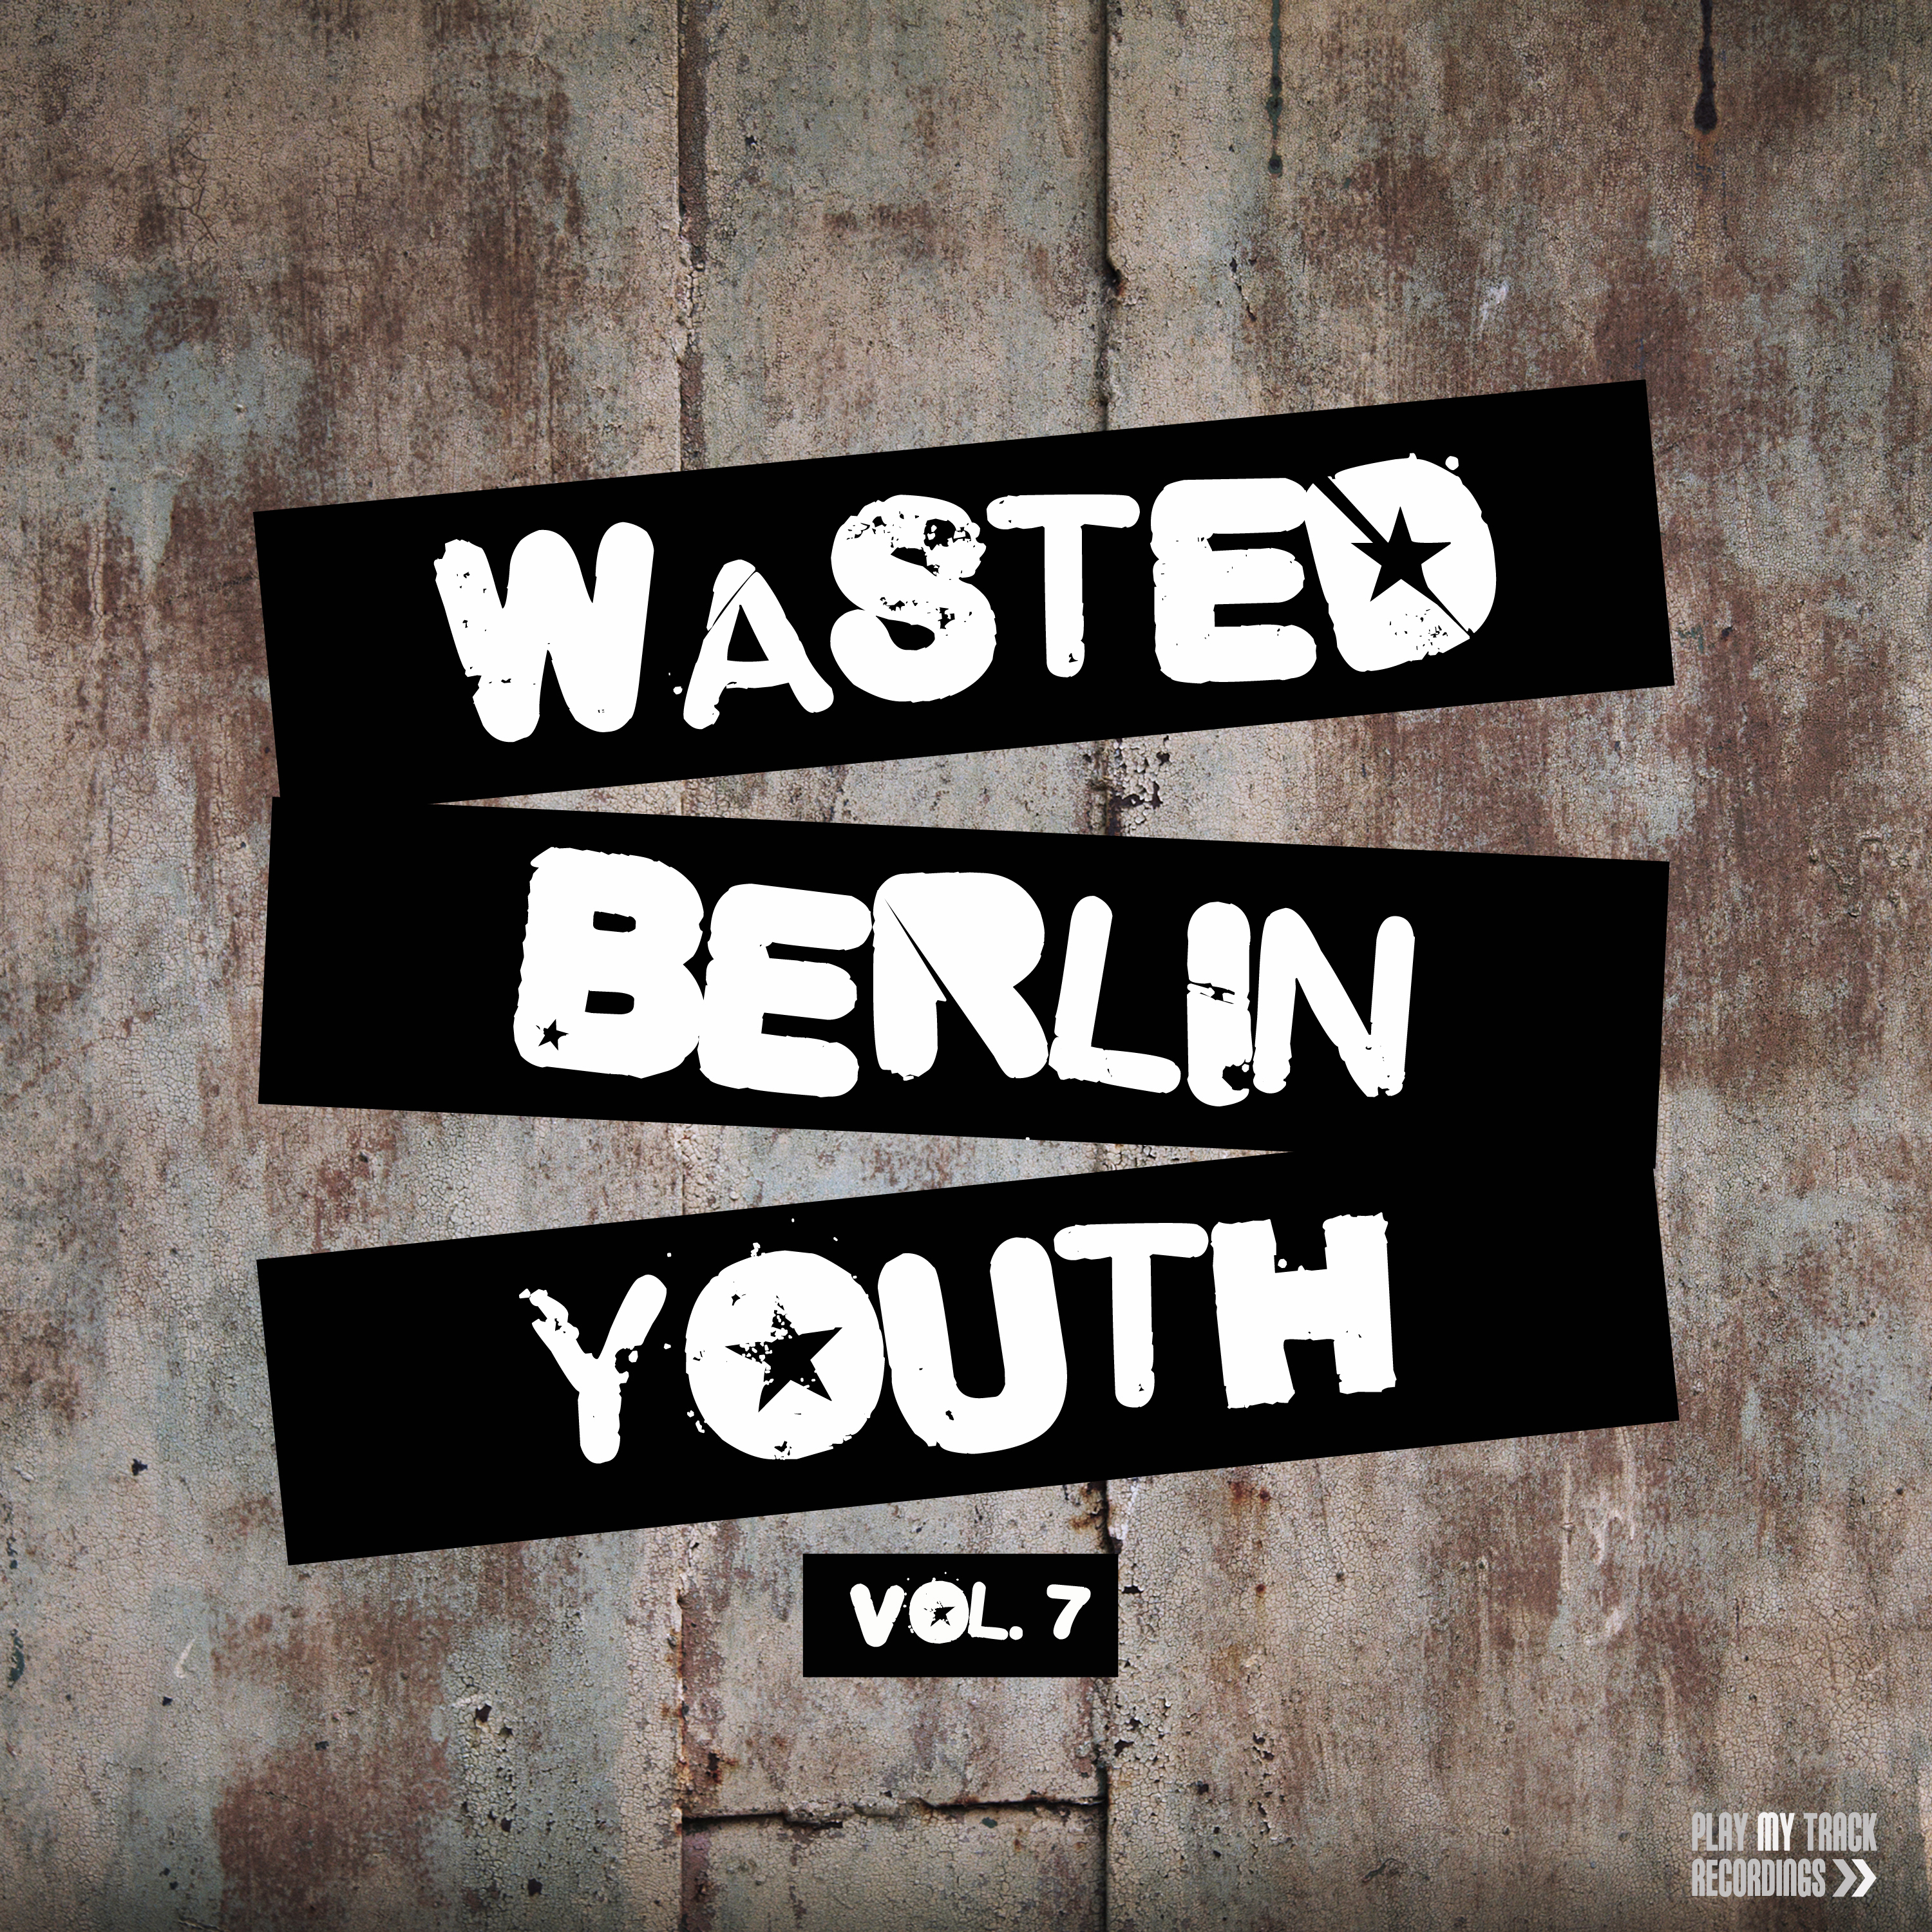 Wasted Berlin Youth, Vol. 7